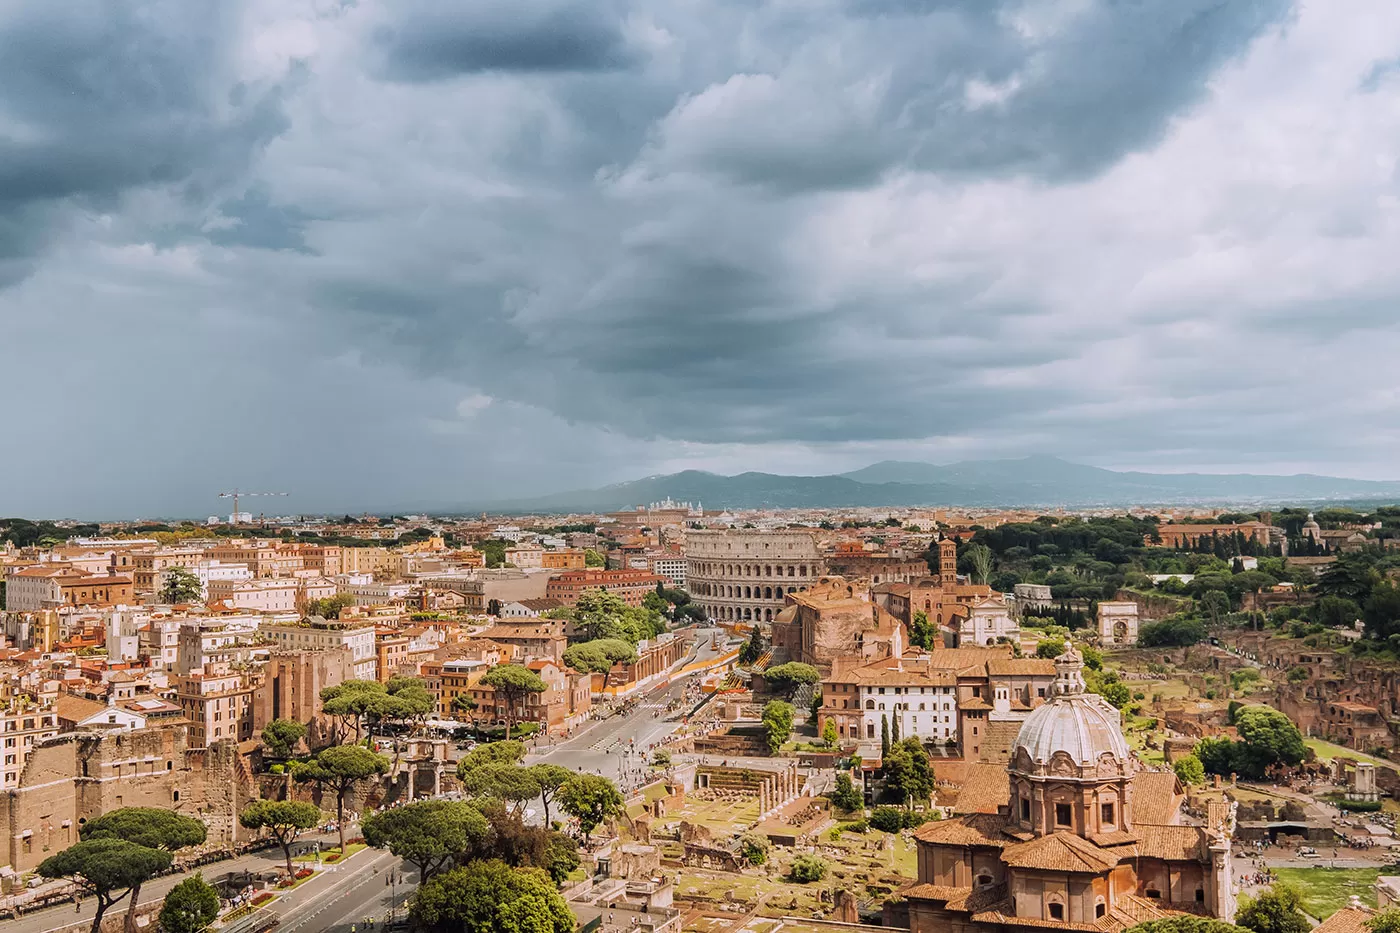 Unique things to do in Rome - View of Roman Forum and Colosseum from Il Vittoriano